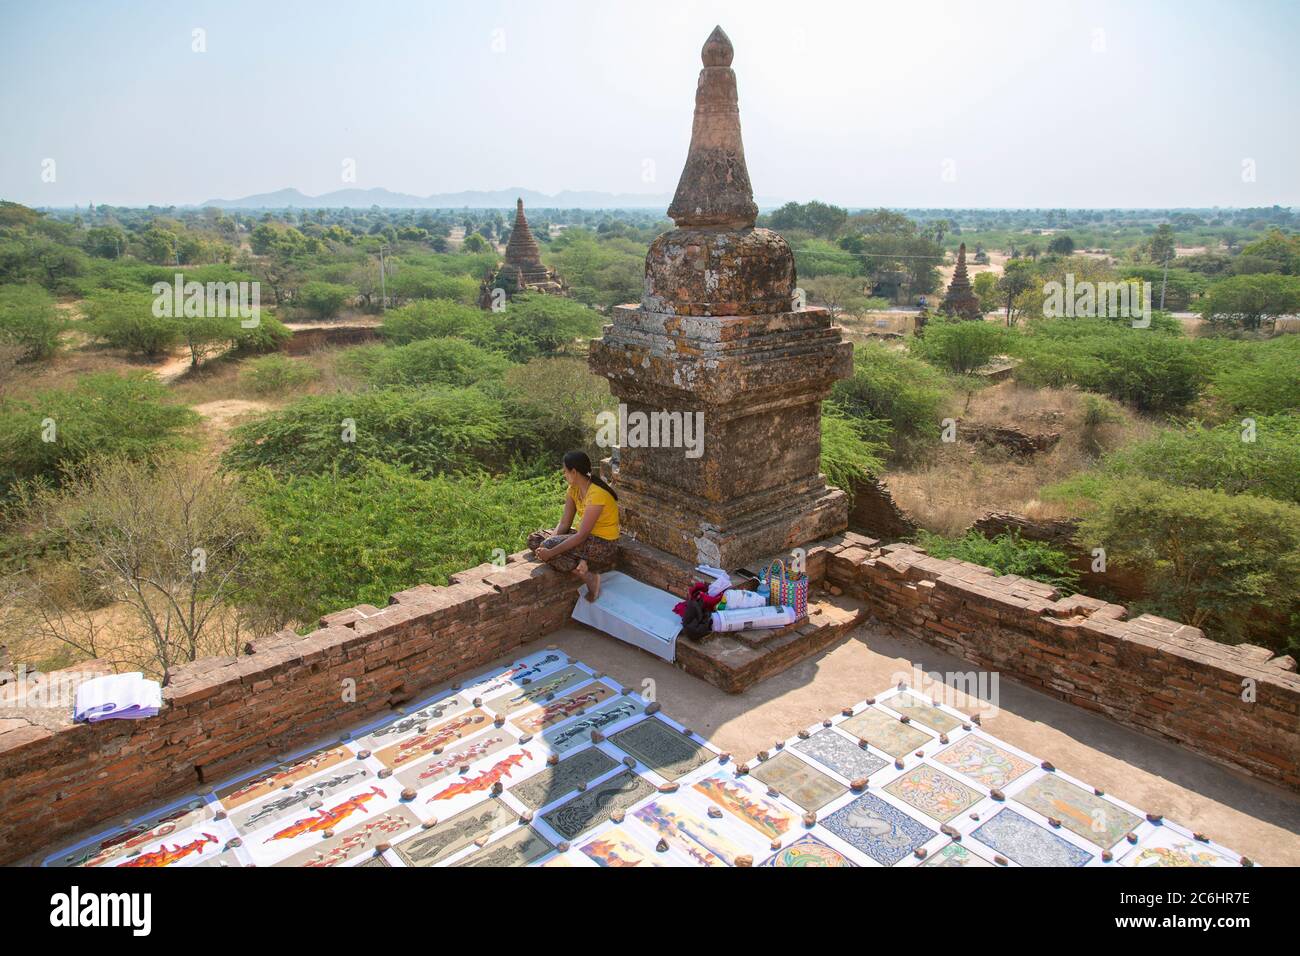 A young woman selling souvenir paintings at a temple in Old Bagan, Myanmar Stock Photo